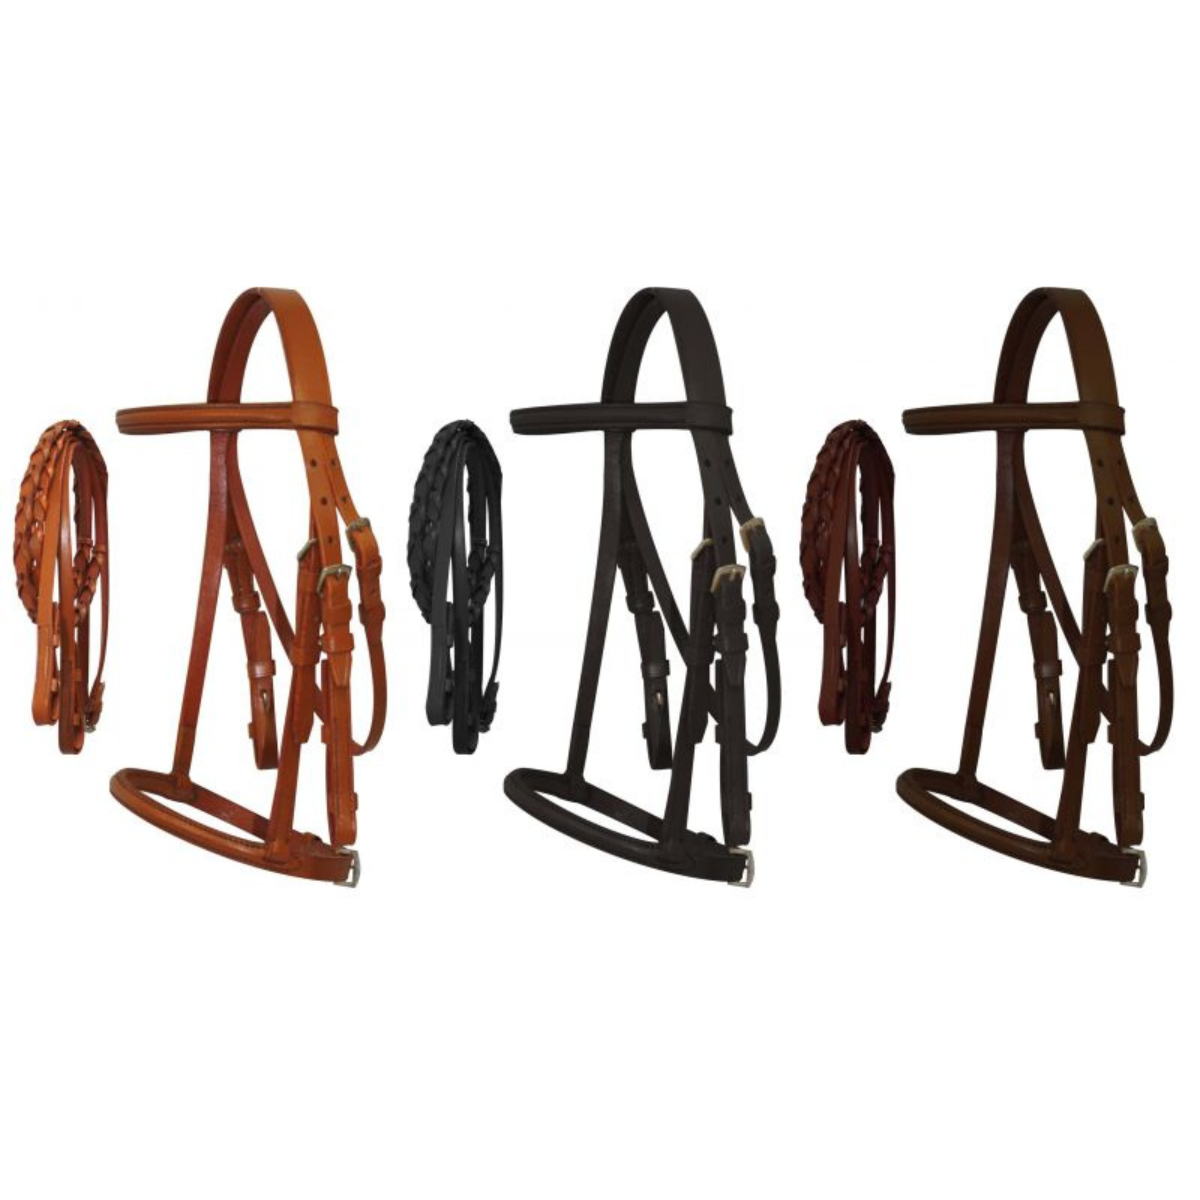 Pony Size English headstall with raised browband 